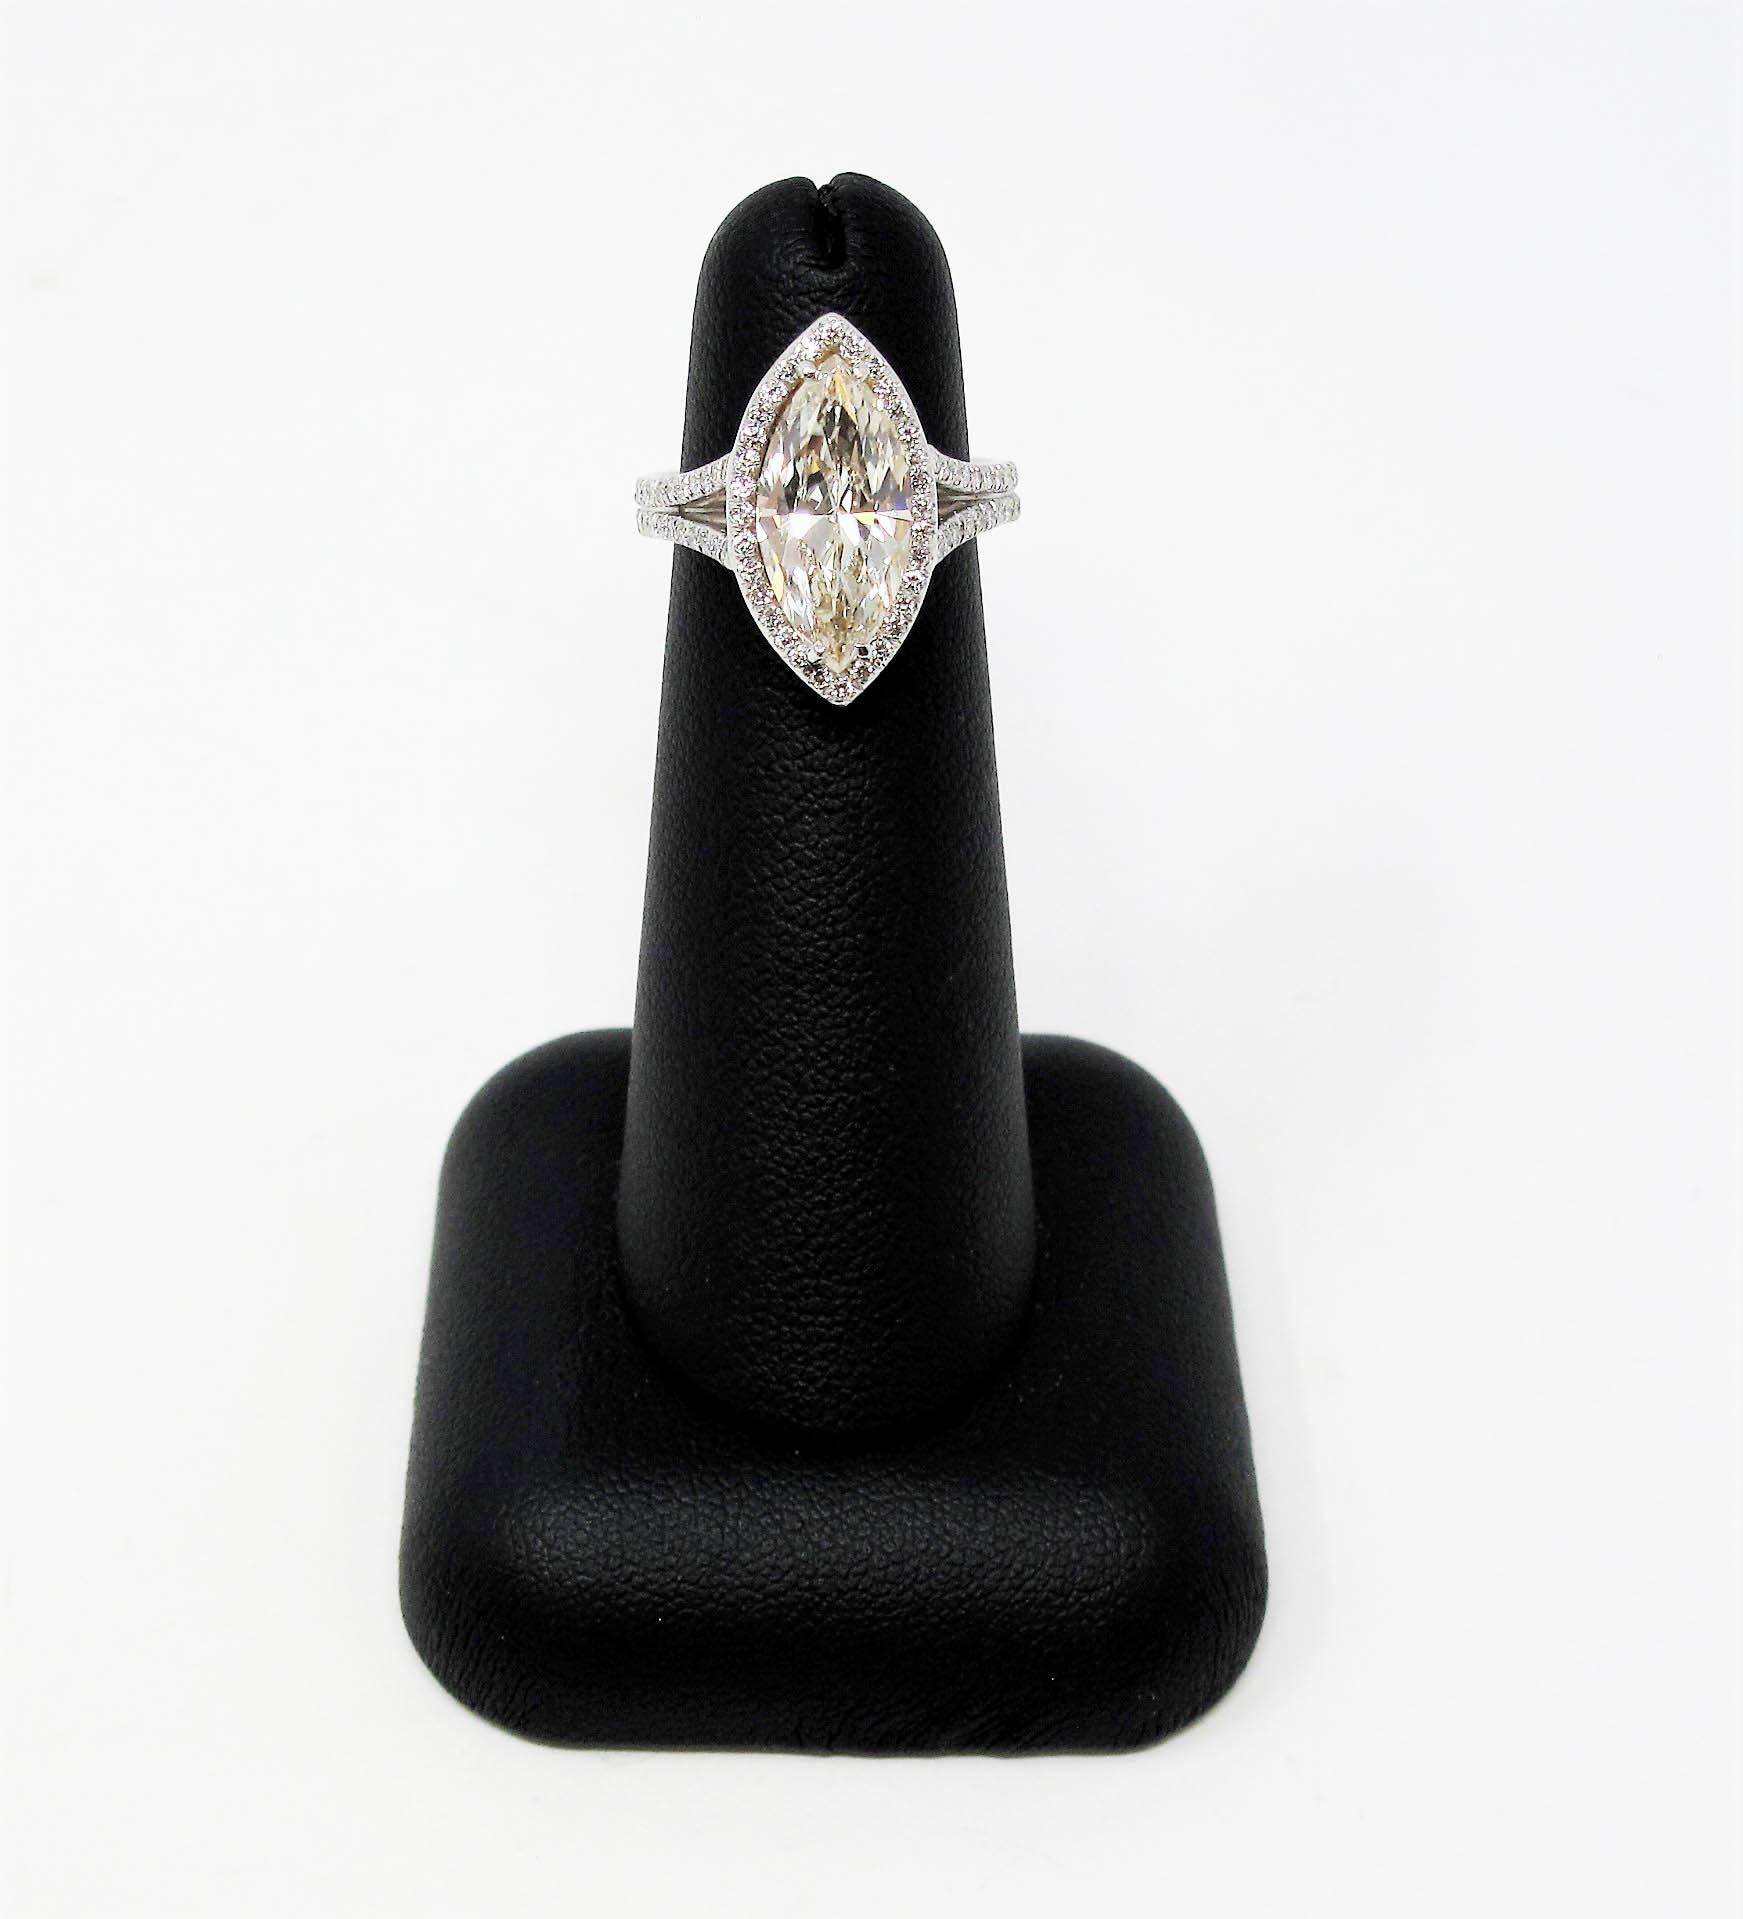 3.01 Carat Marquis Diamond With Halo Split Shank Engagement Ring in Platinum For Sale 1